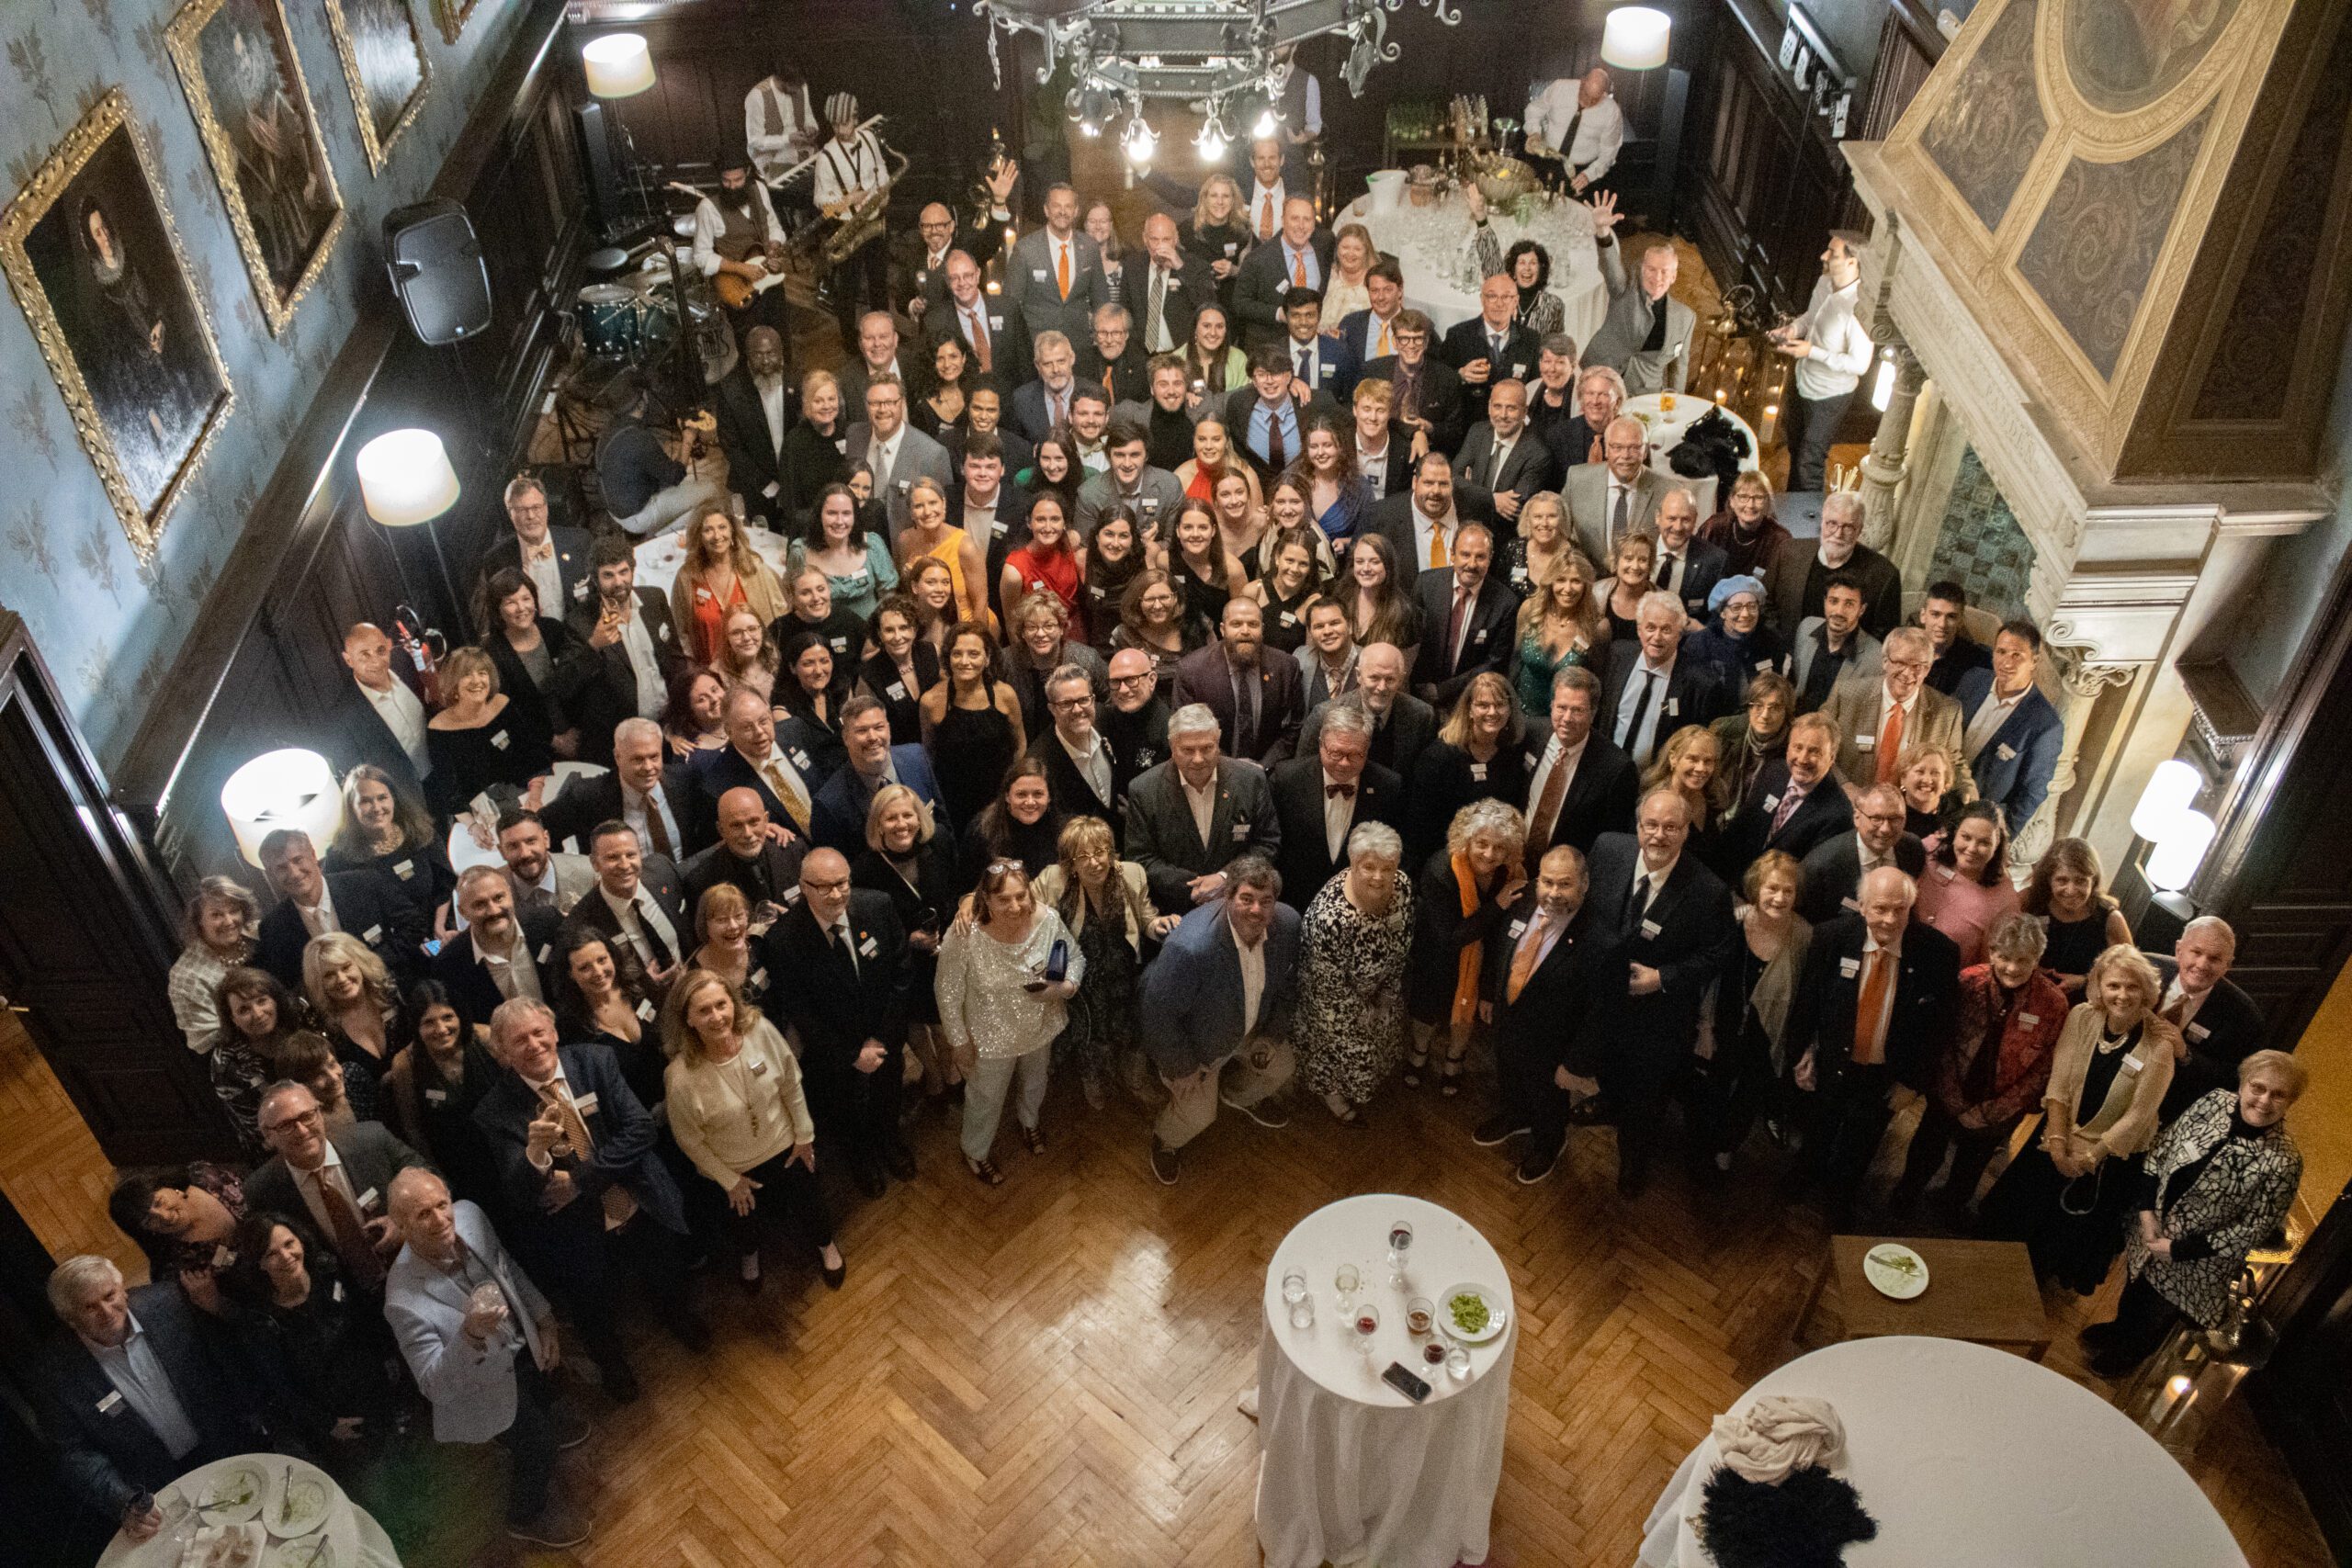 A group of more than 100 formally-dressed Clemson architecture alumni and students smile up at the camera from the floor of an ornate ballroom.